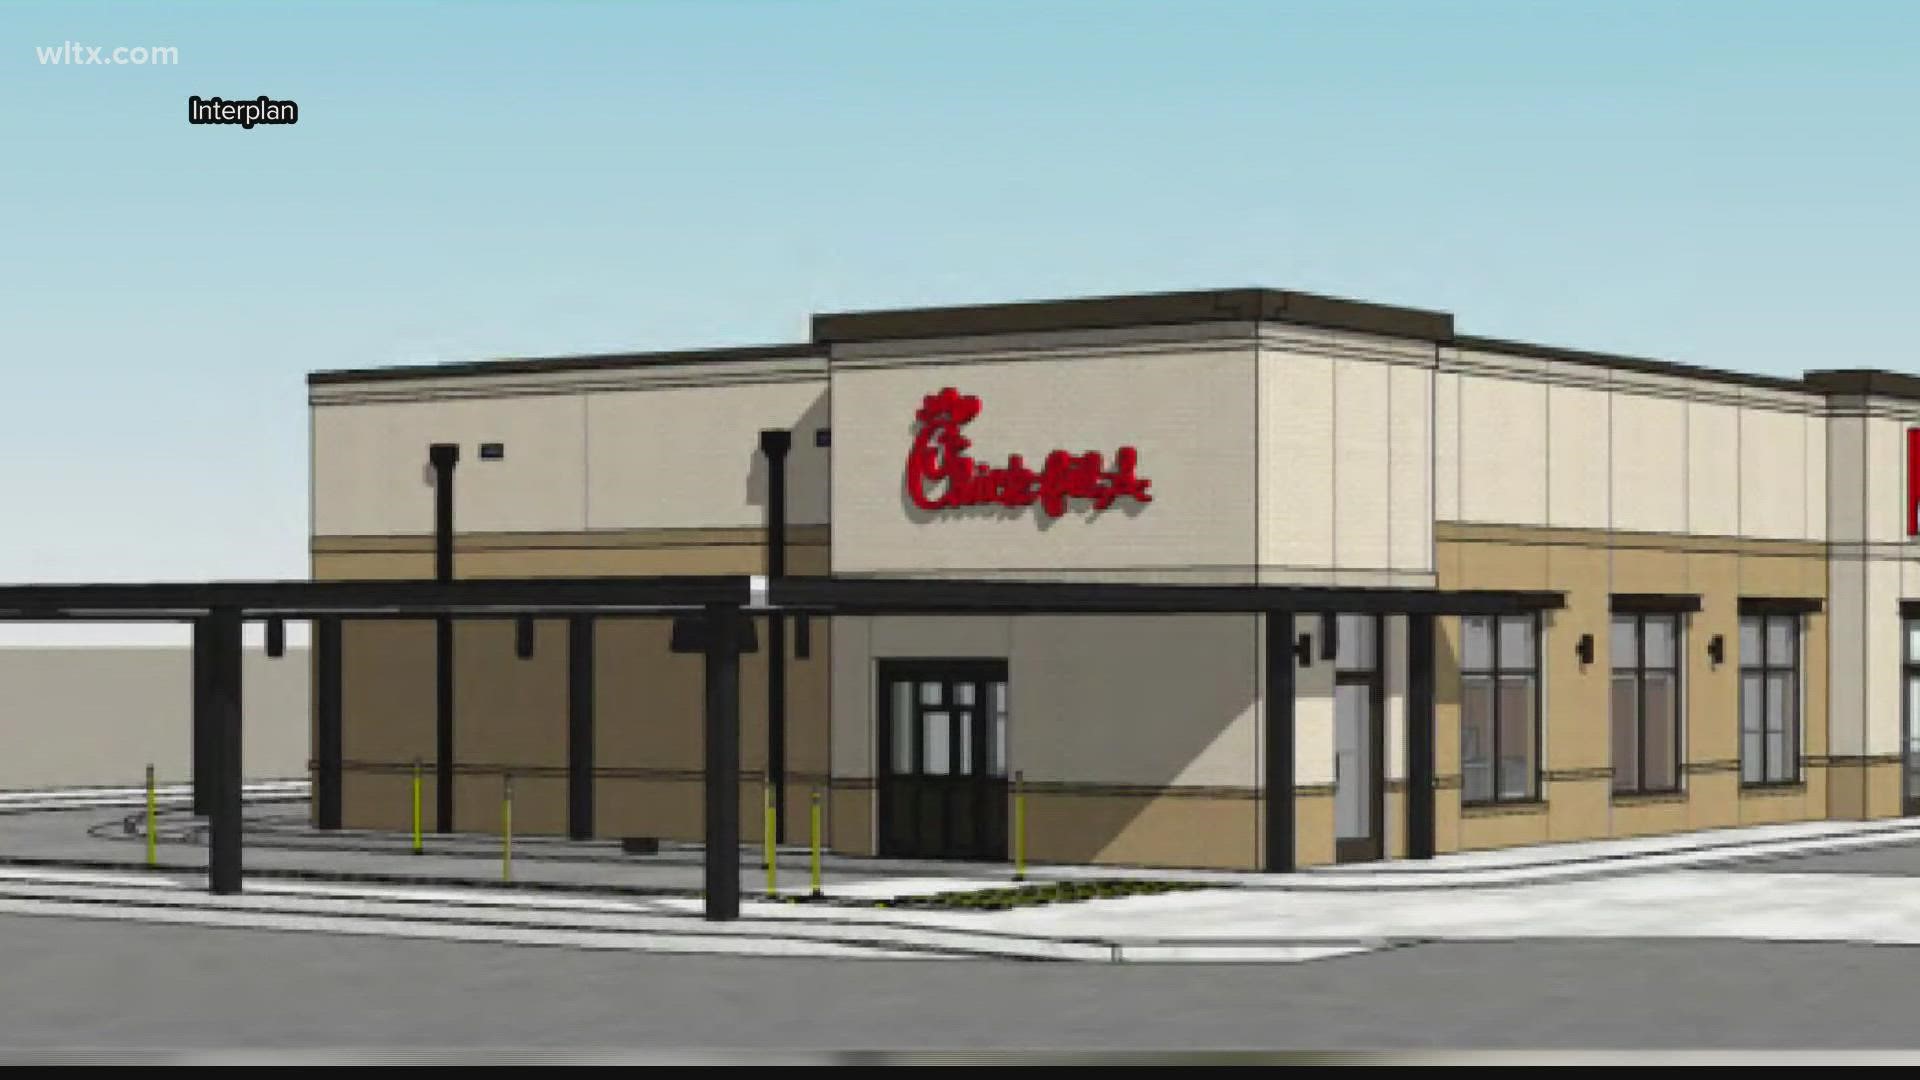 The popular restaurant in Harbison will be remade to better handle drive-through traffic.